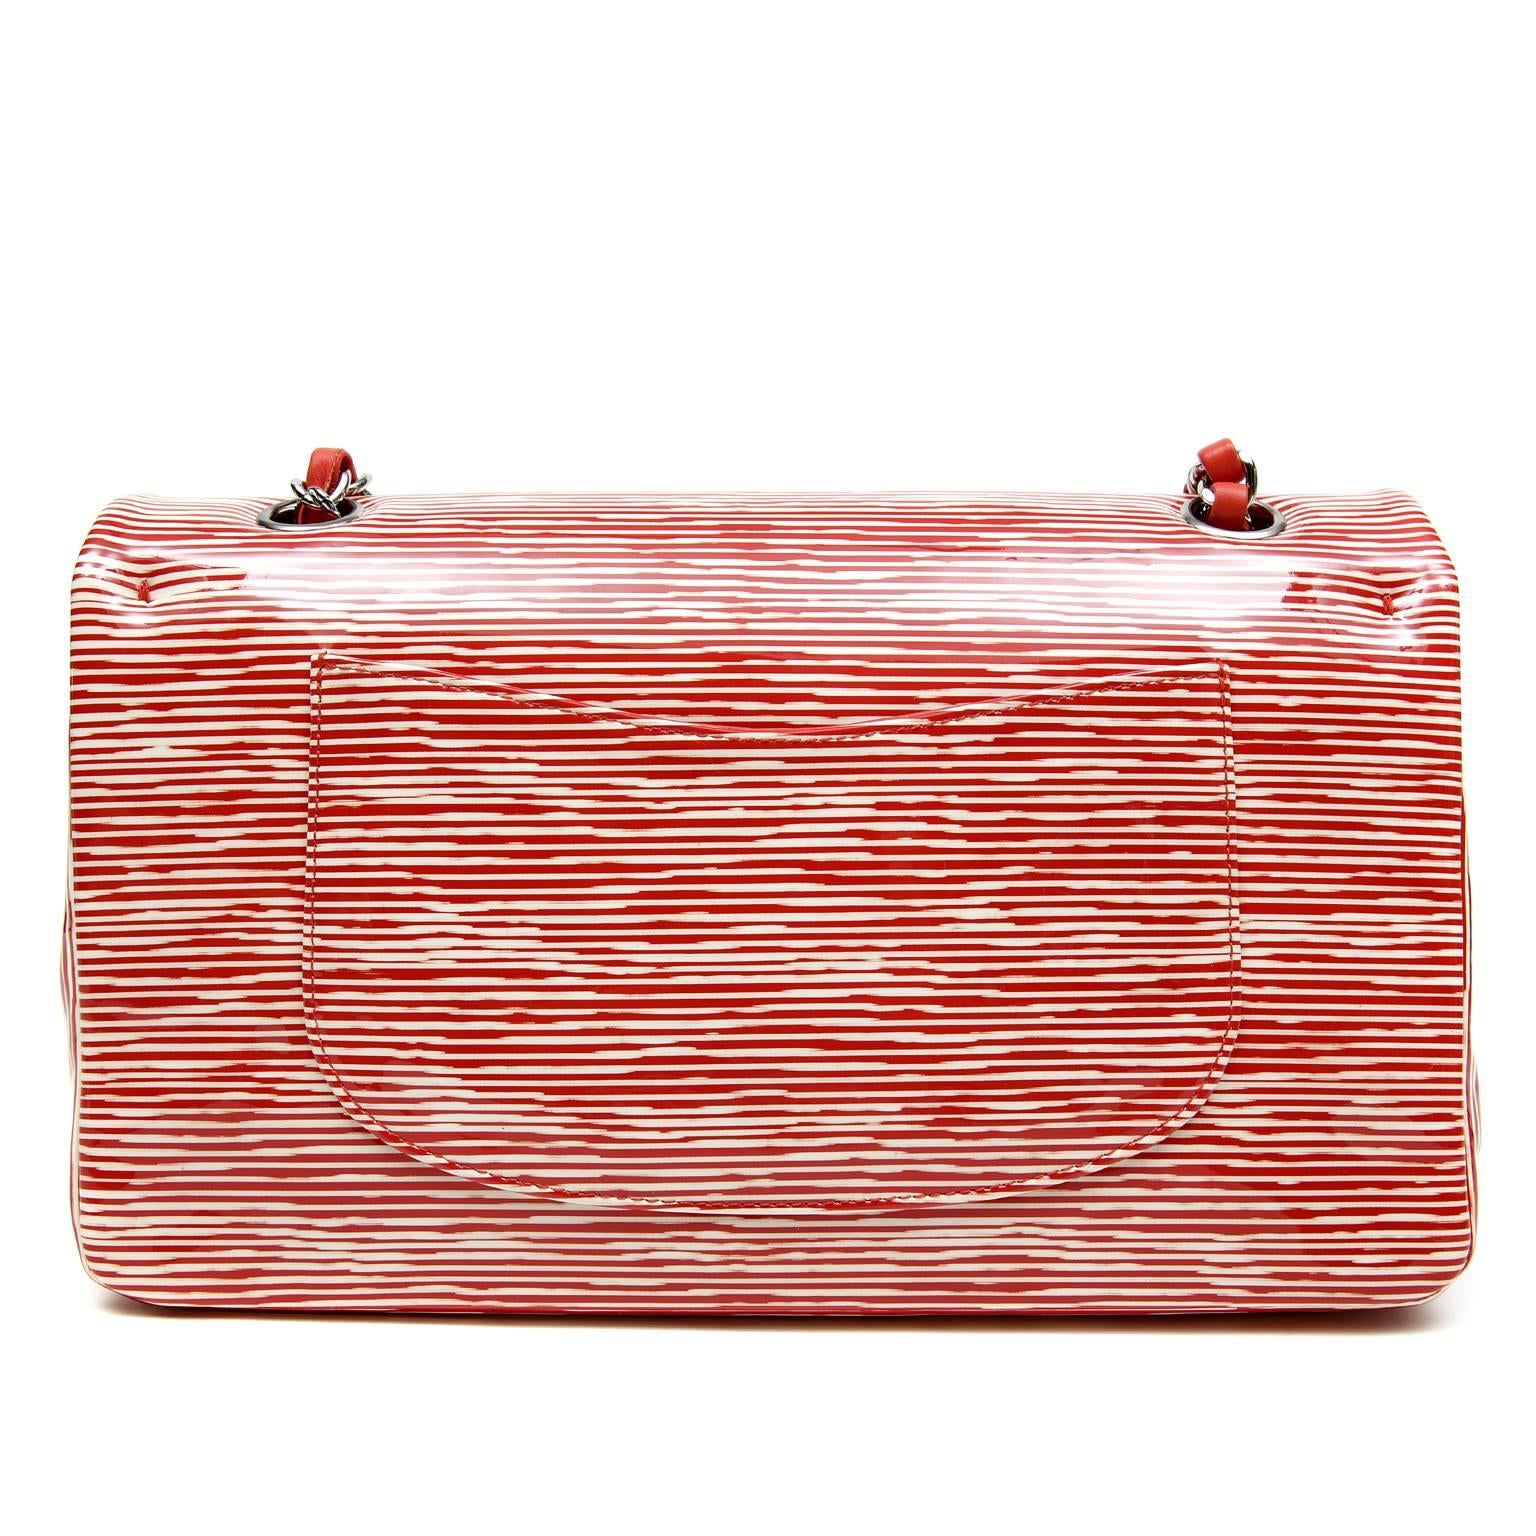 Chanel Patent Leather Candy Cane Classic Flap- PRISTINE
 The unique variegated striping on this piece makes it a must have for any collection. 

Glossy patent leather medium double flap is covered in red and white uneven striping evoking images